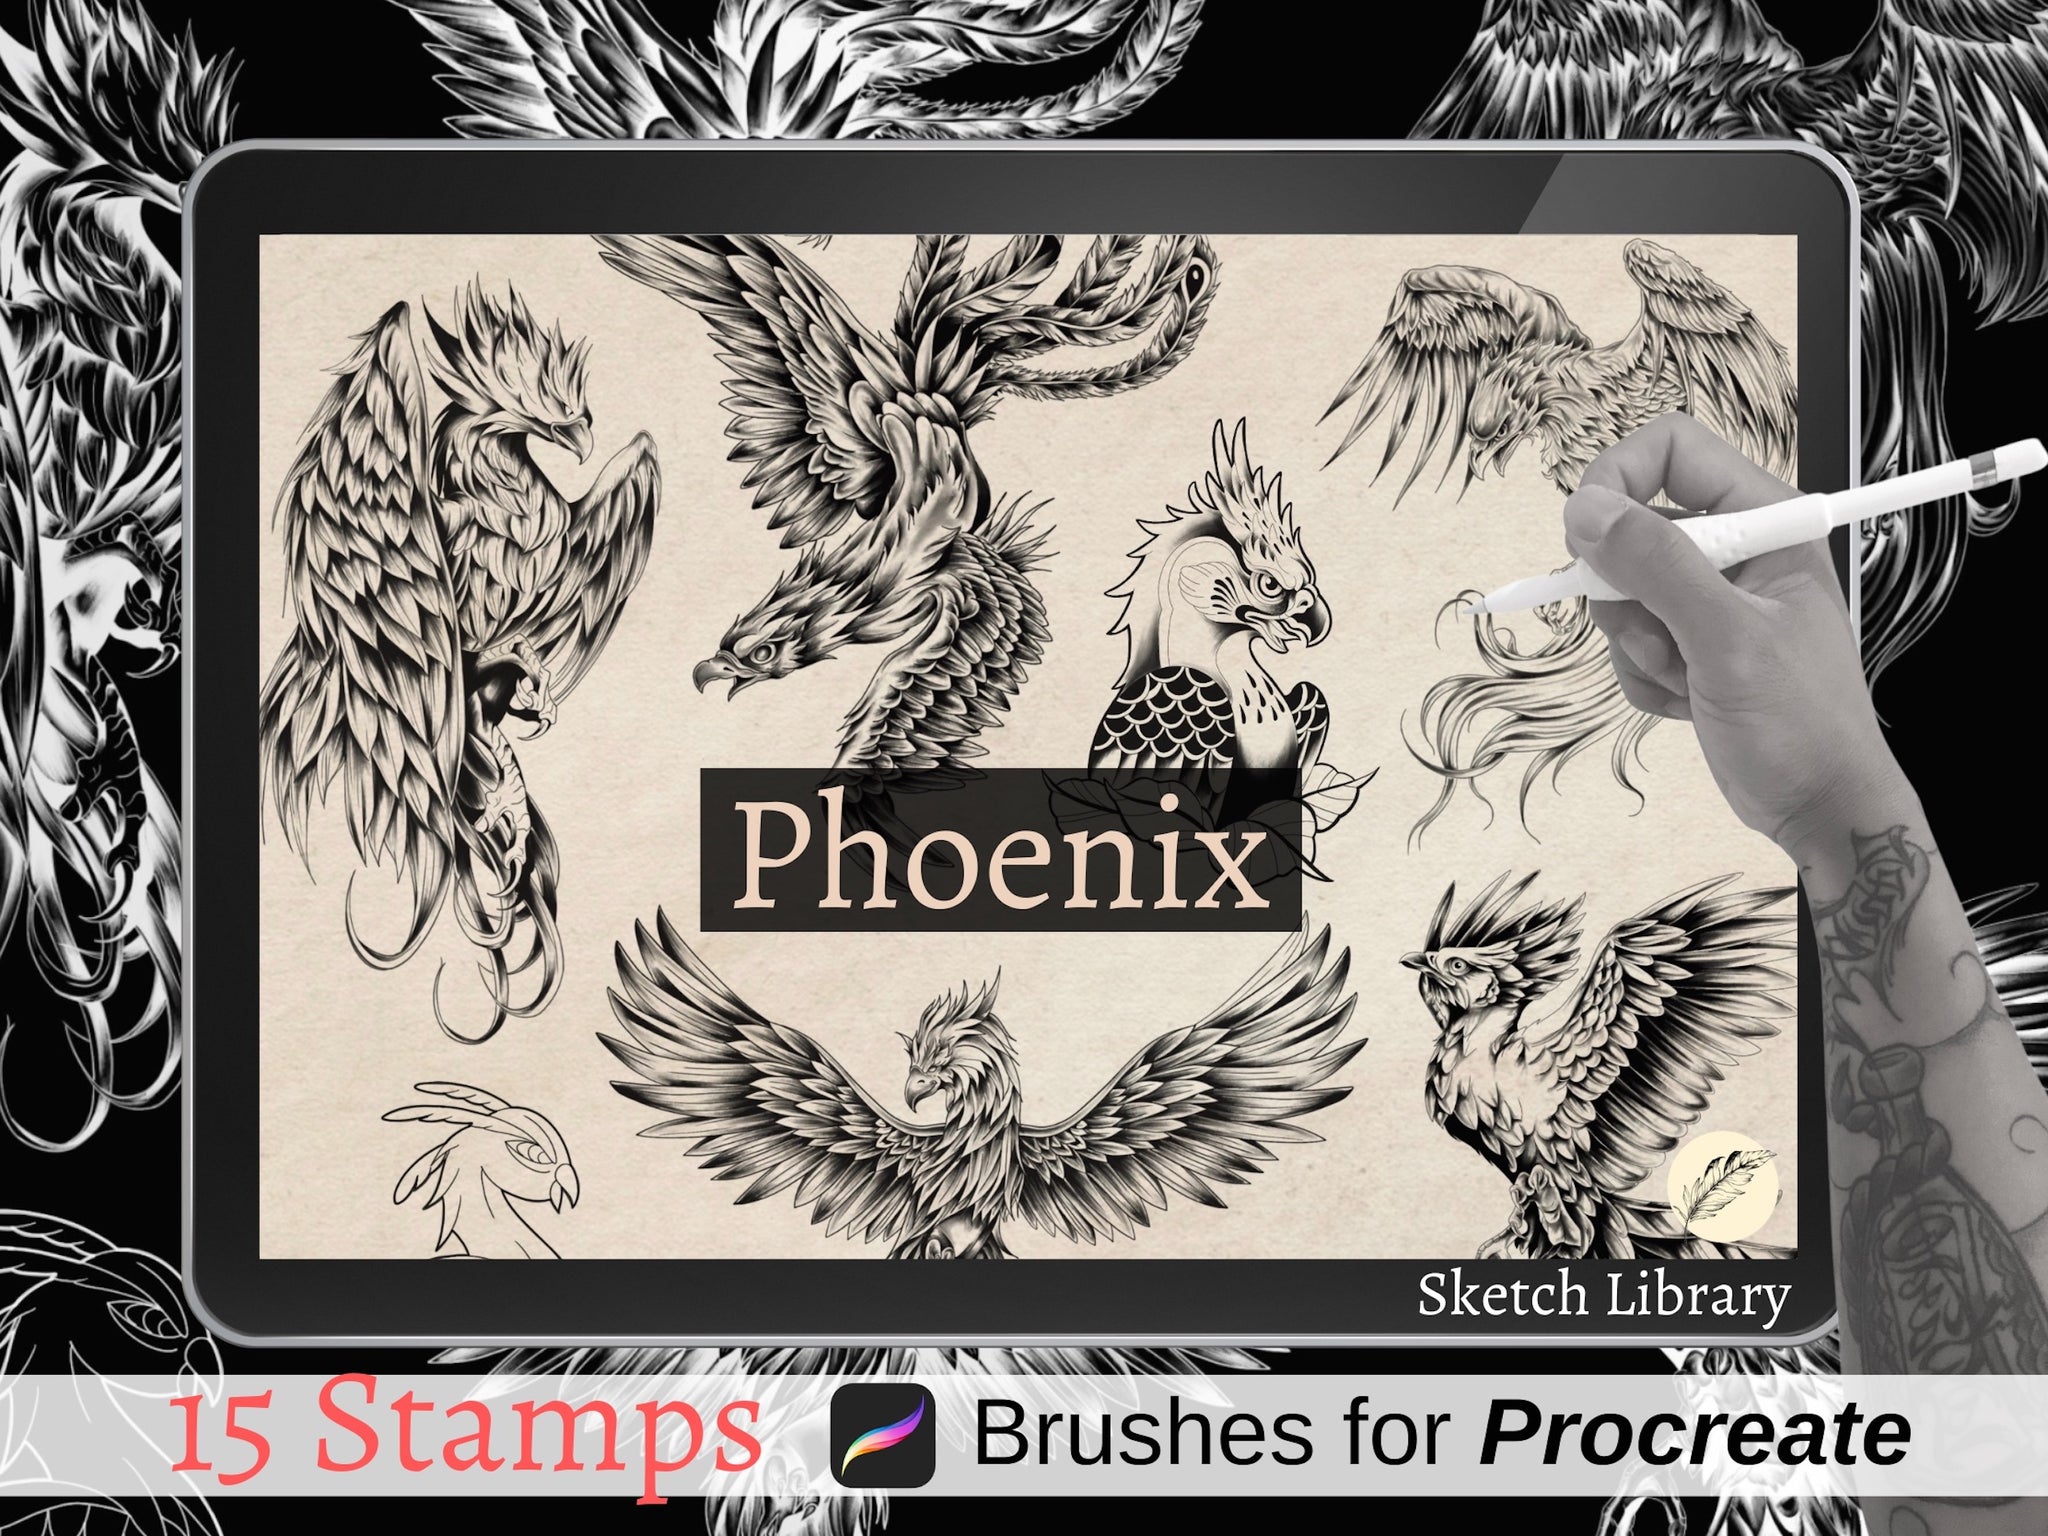 Learn to CREATE YOUR OWN CUSTOM STAMP STENCIL BRUSH in the Procreate app  for iPad